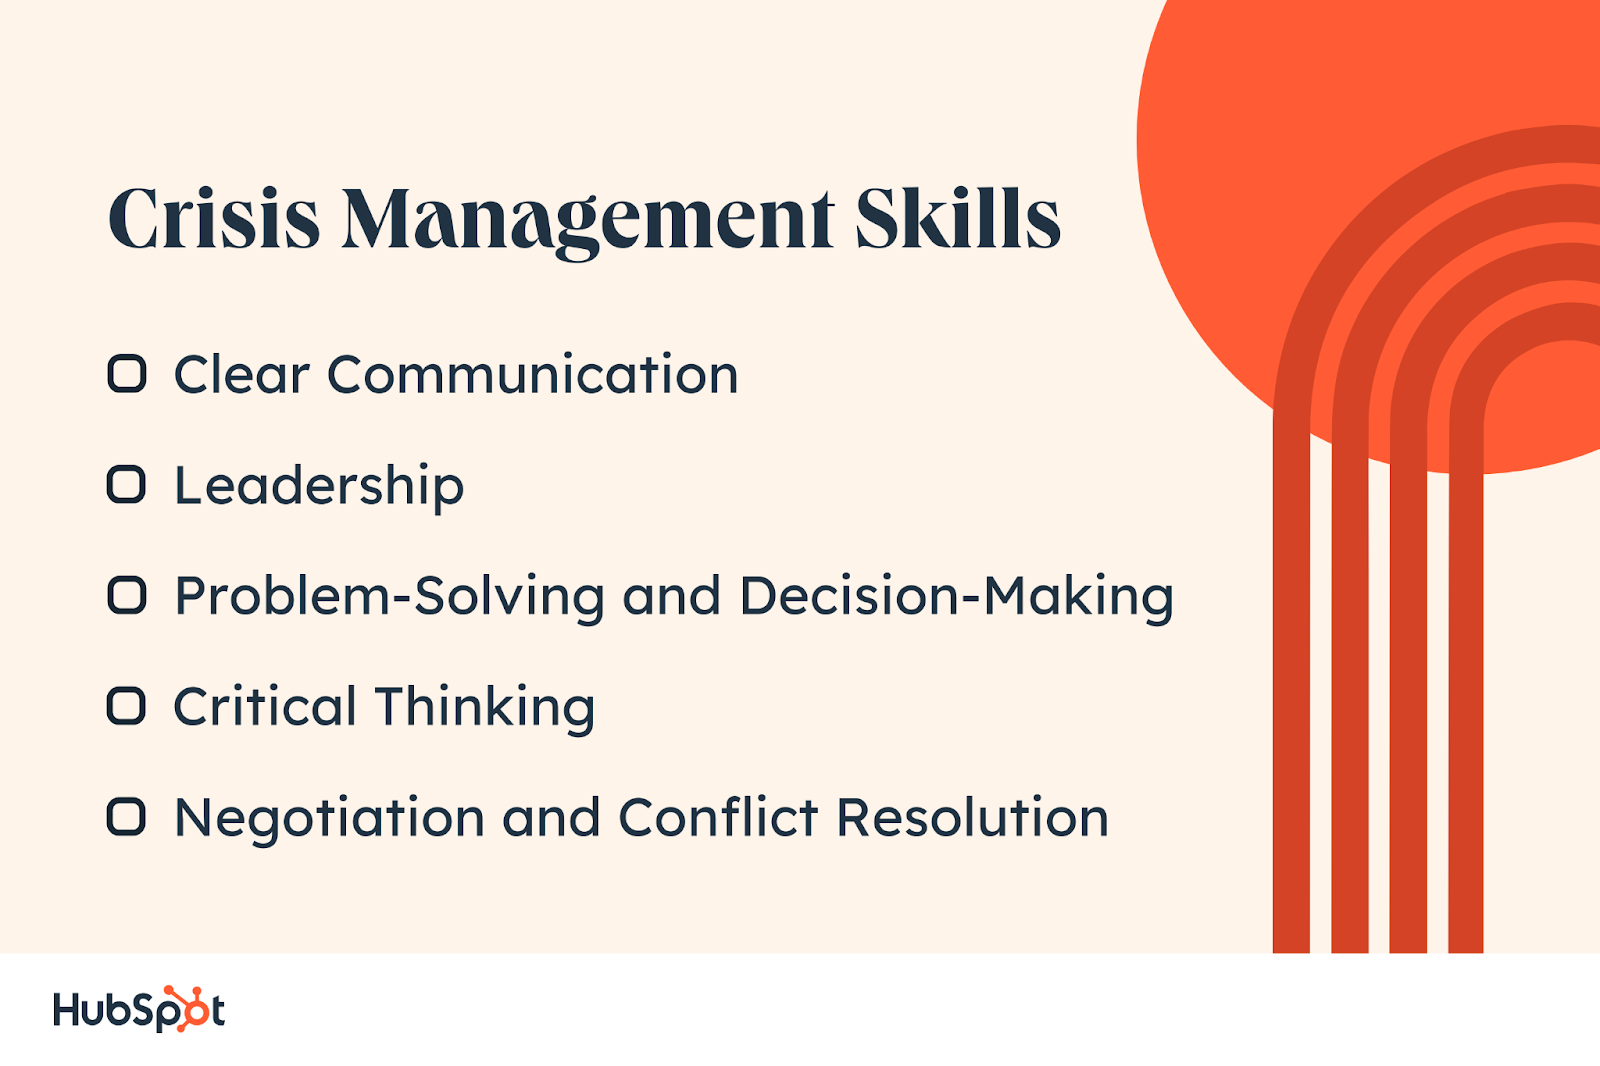 clear communication, leadership, problem-solving, decision making, critical thinking, negotiation, conflict resolution